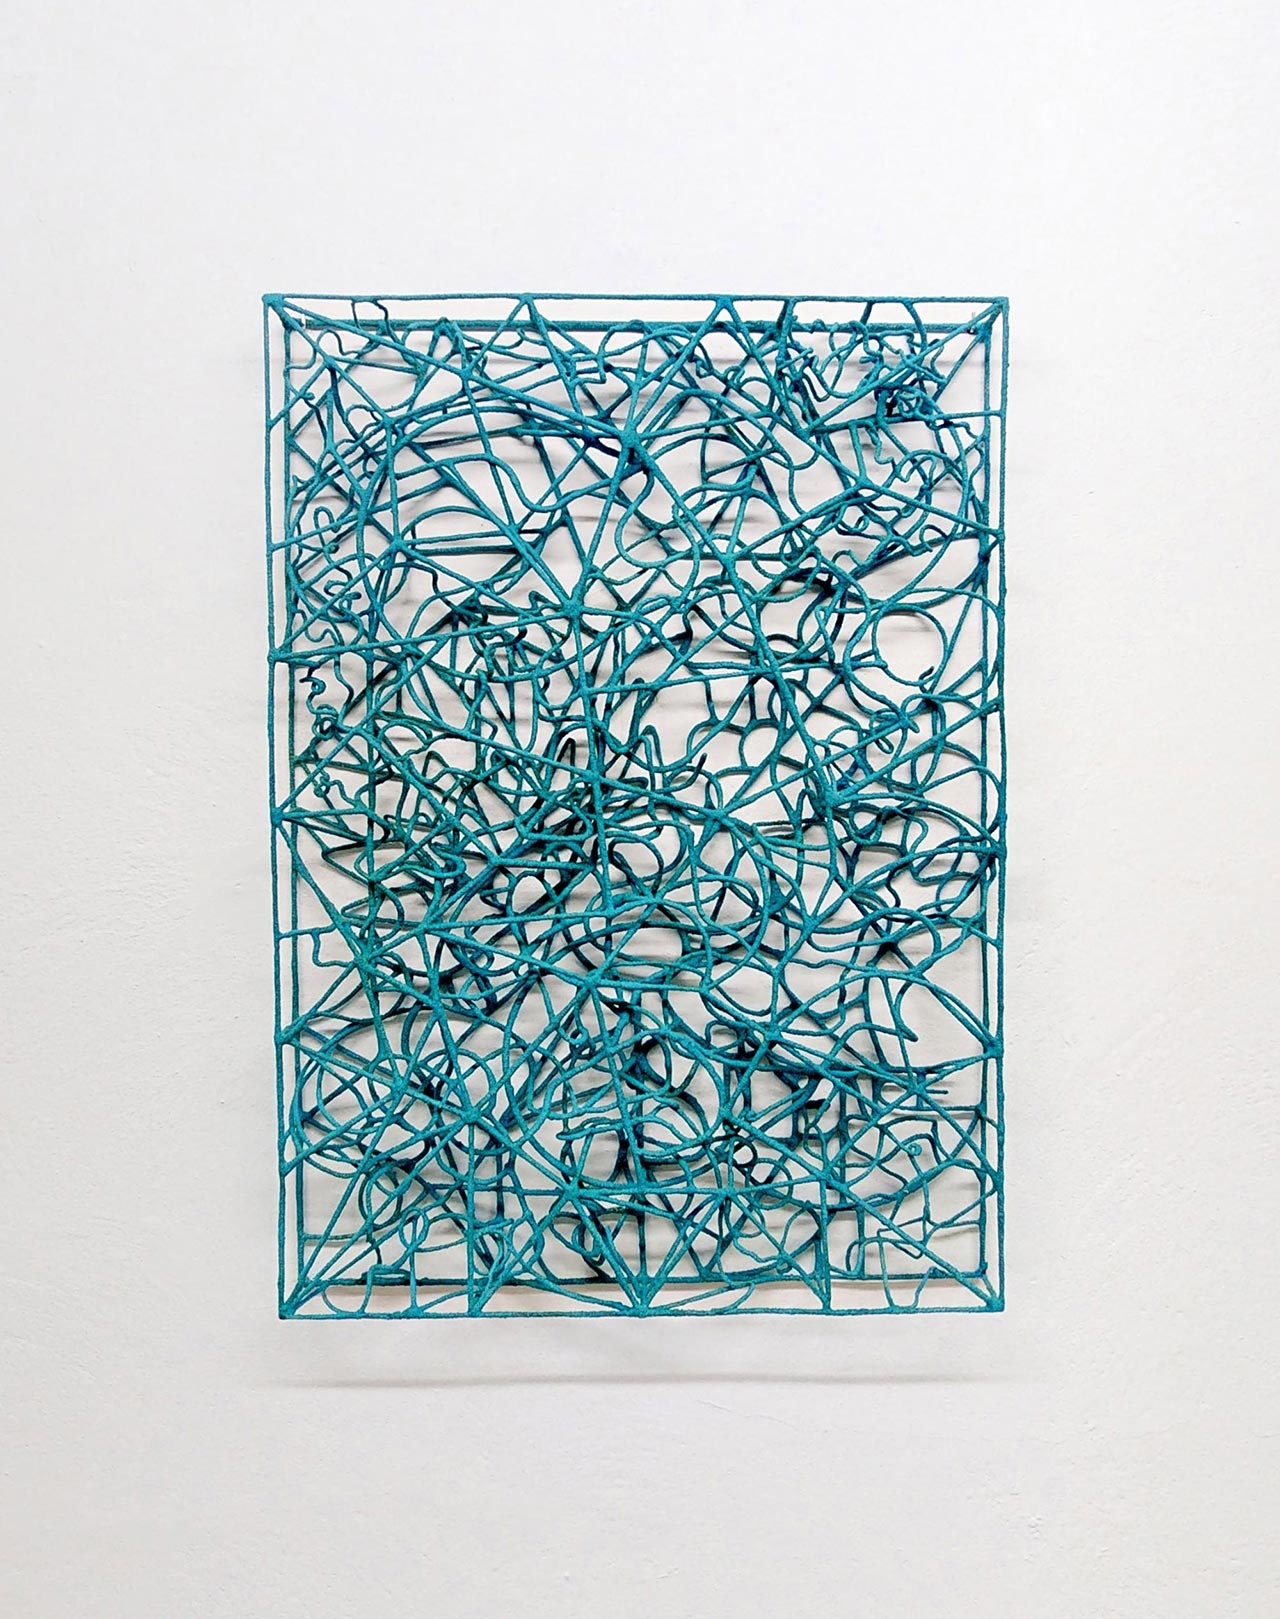 Wire collide 1001, 2019. Copper wire, solder, sand, varnish, 65x47x5,5 cm | 25½x18½x¼ inches. Courtesy: The Flat – Massimo Carasi. Photo by The Flat.